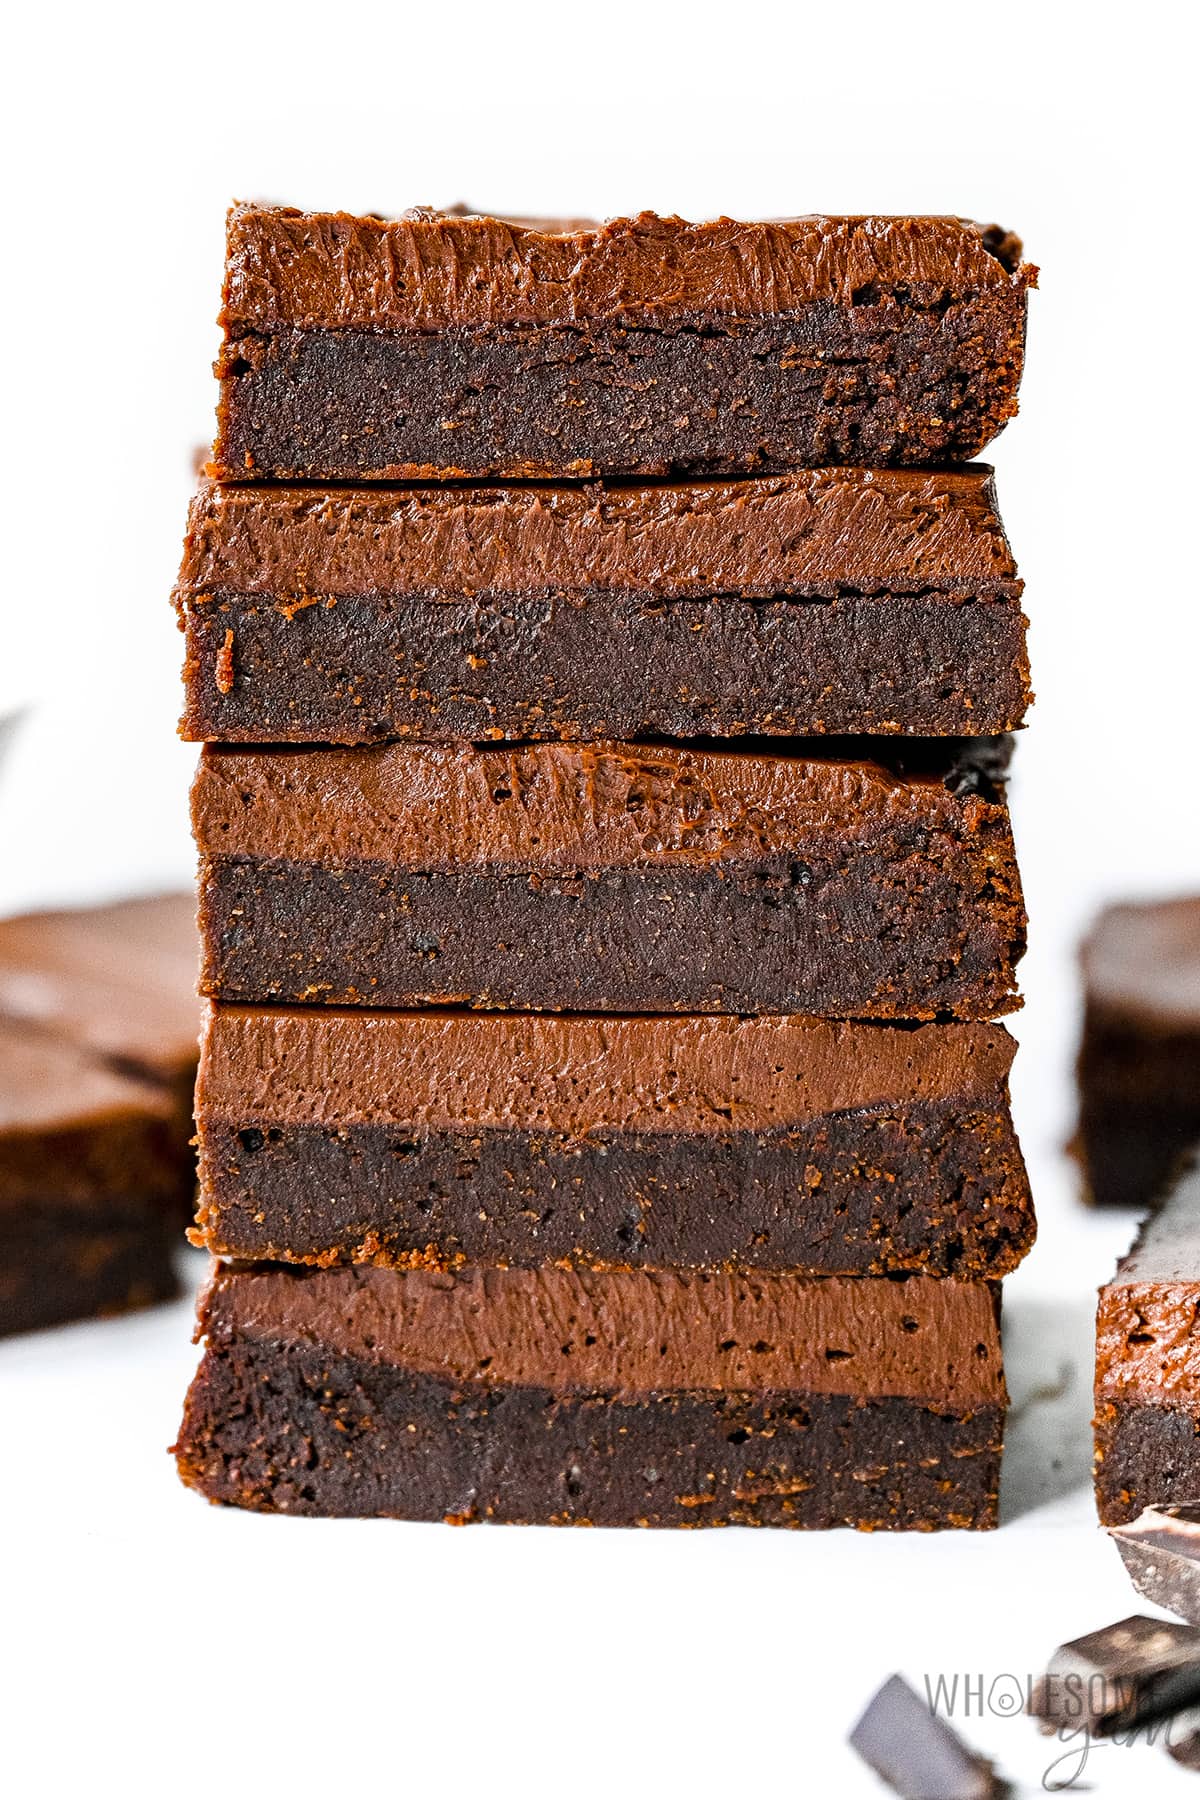 Almond flour keto brownies stacked on top of each other.